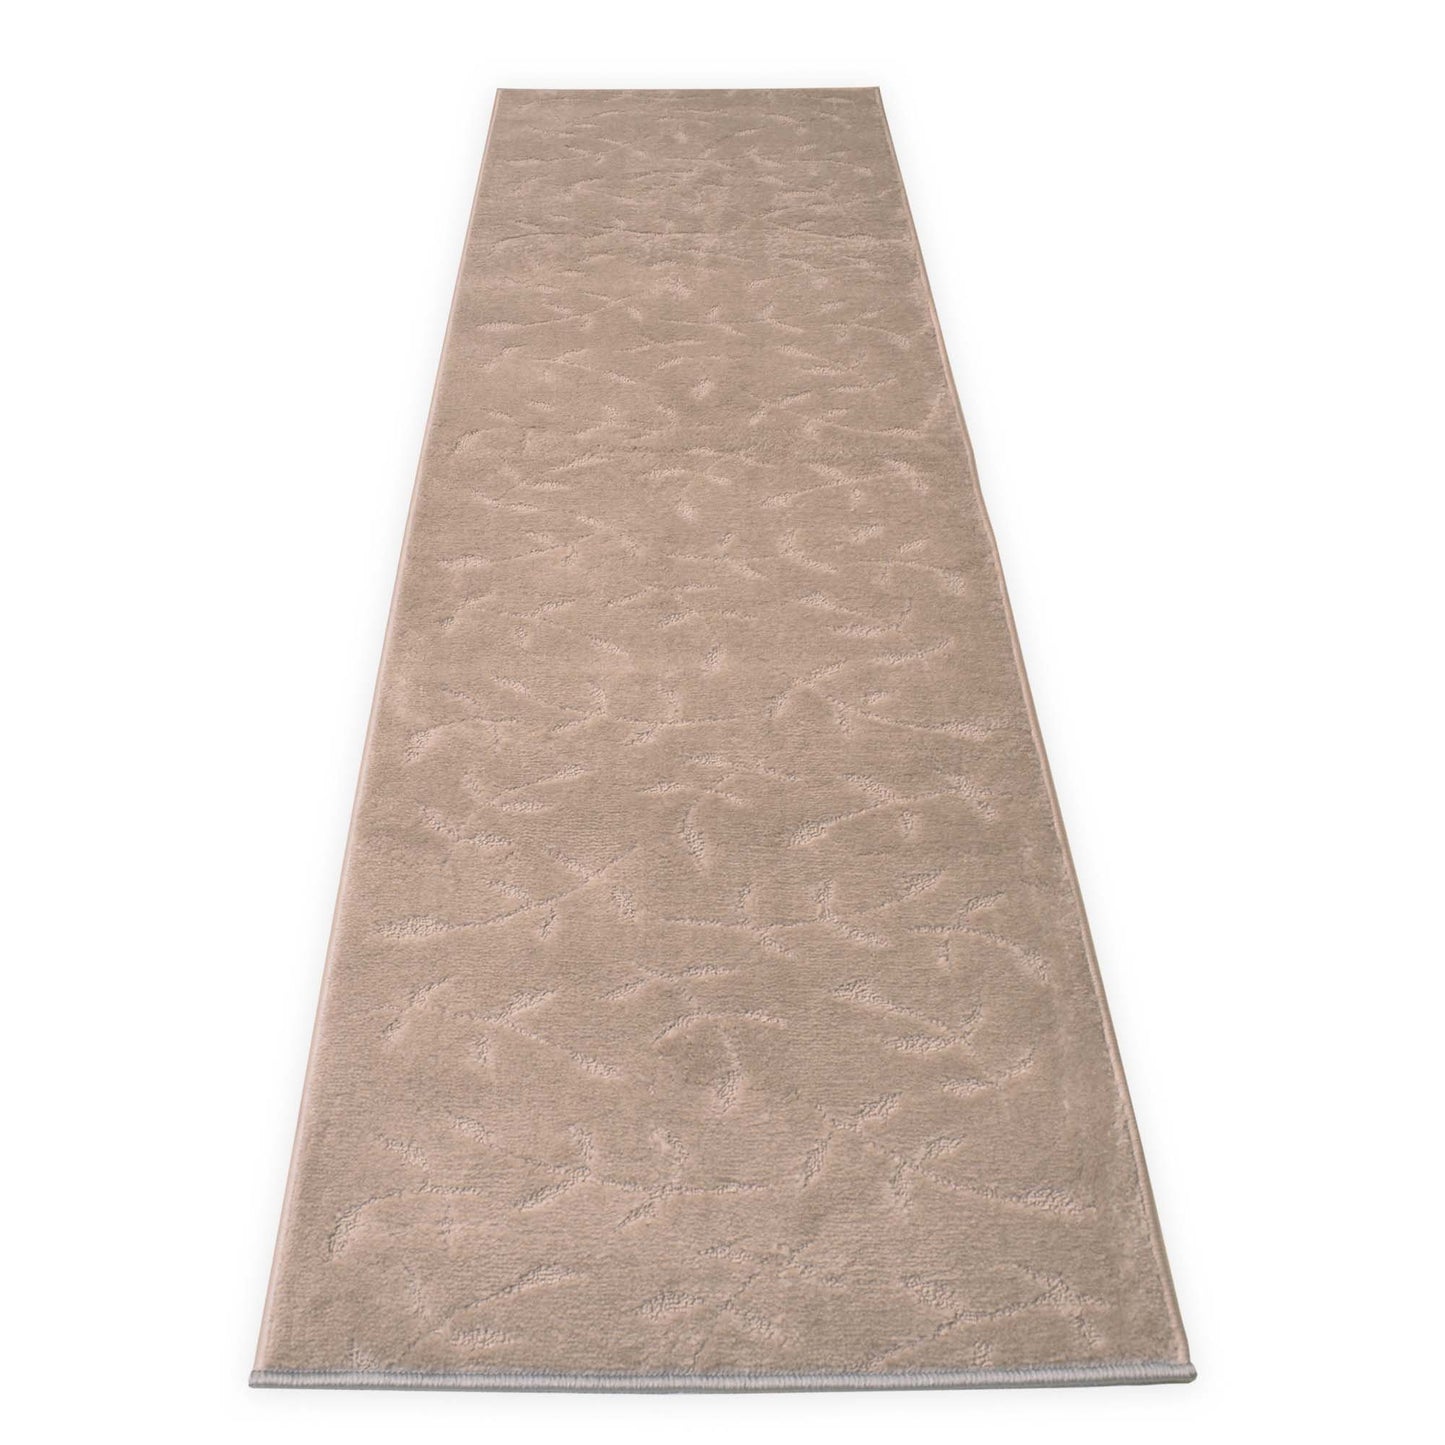 Custom Size Runner Rug Solid Floral Scroll Grey Color Skid Resistant Rug Runner Customize Up to 50 Feet and 25 Inches Width Cut to Size Rugs